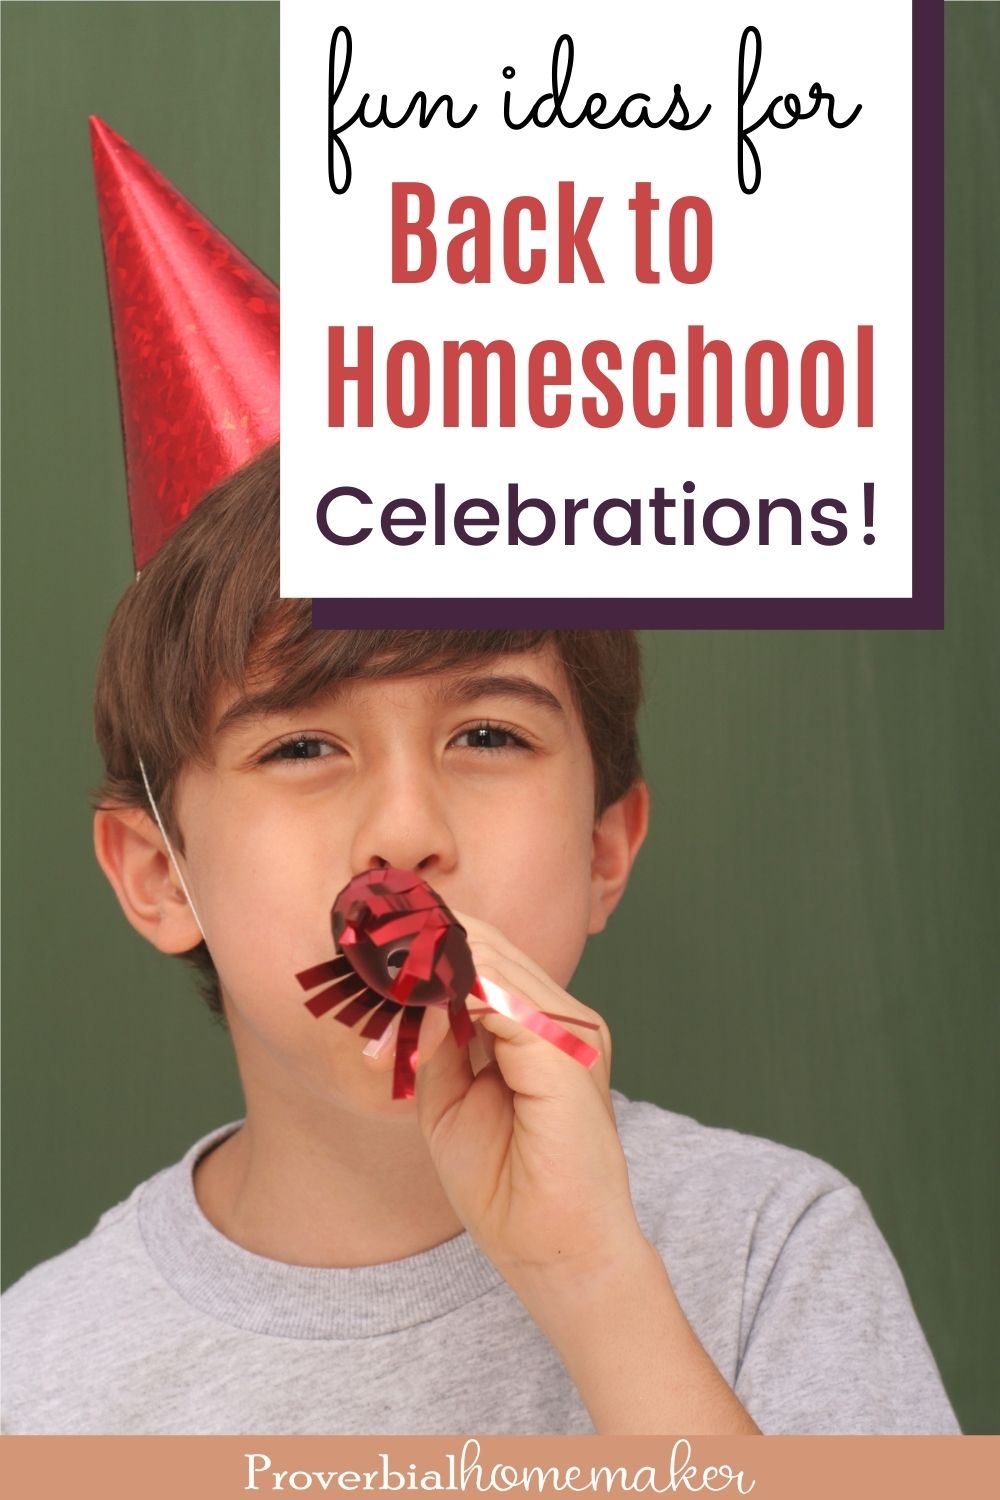 Enjoy fun ideas for back to homeschool celebrations your kids will love!